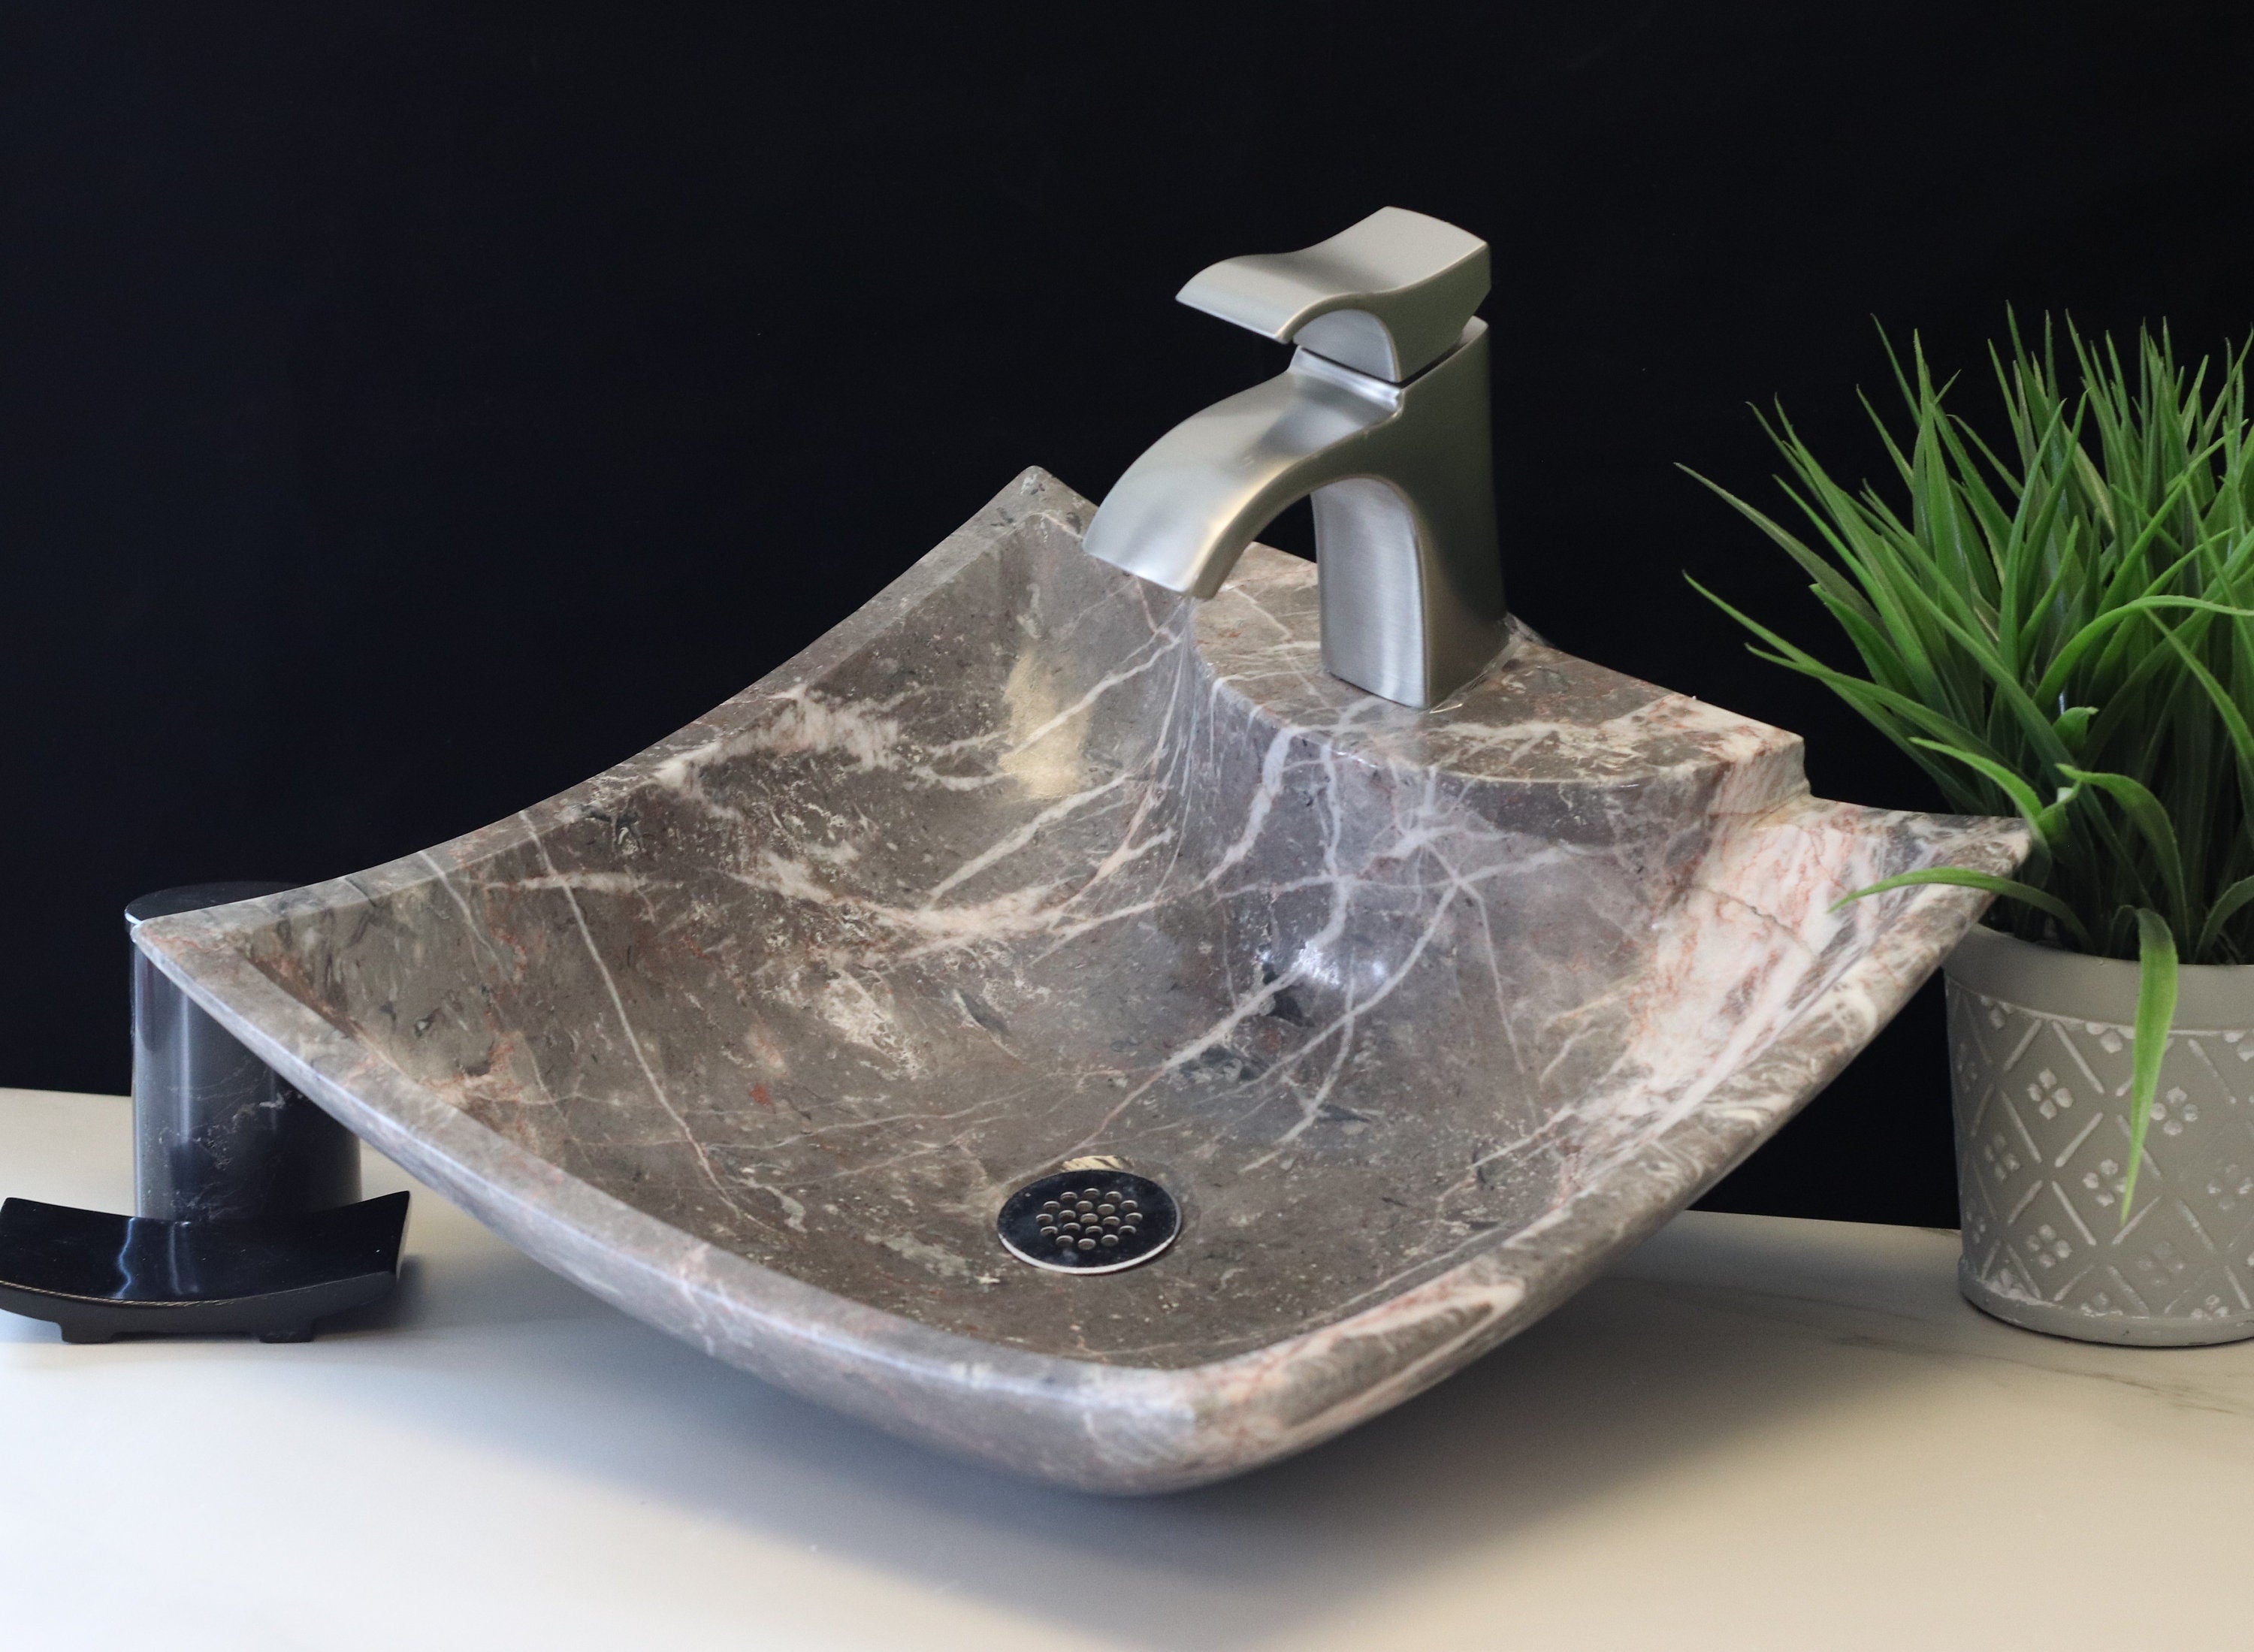 Square Grey Marble Vessel Bathroom Above Counter Sink with Polished Finish. Handmade in Mexico. Ships from the USA. Buy Now at www.felipeandgrace.com.